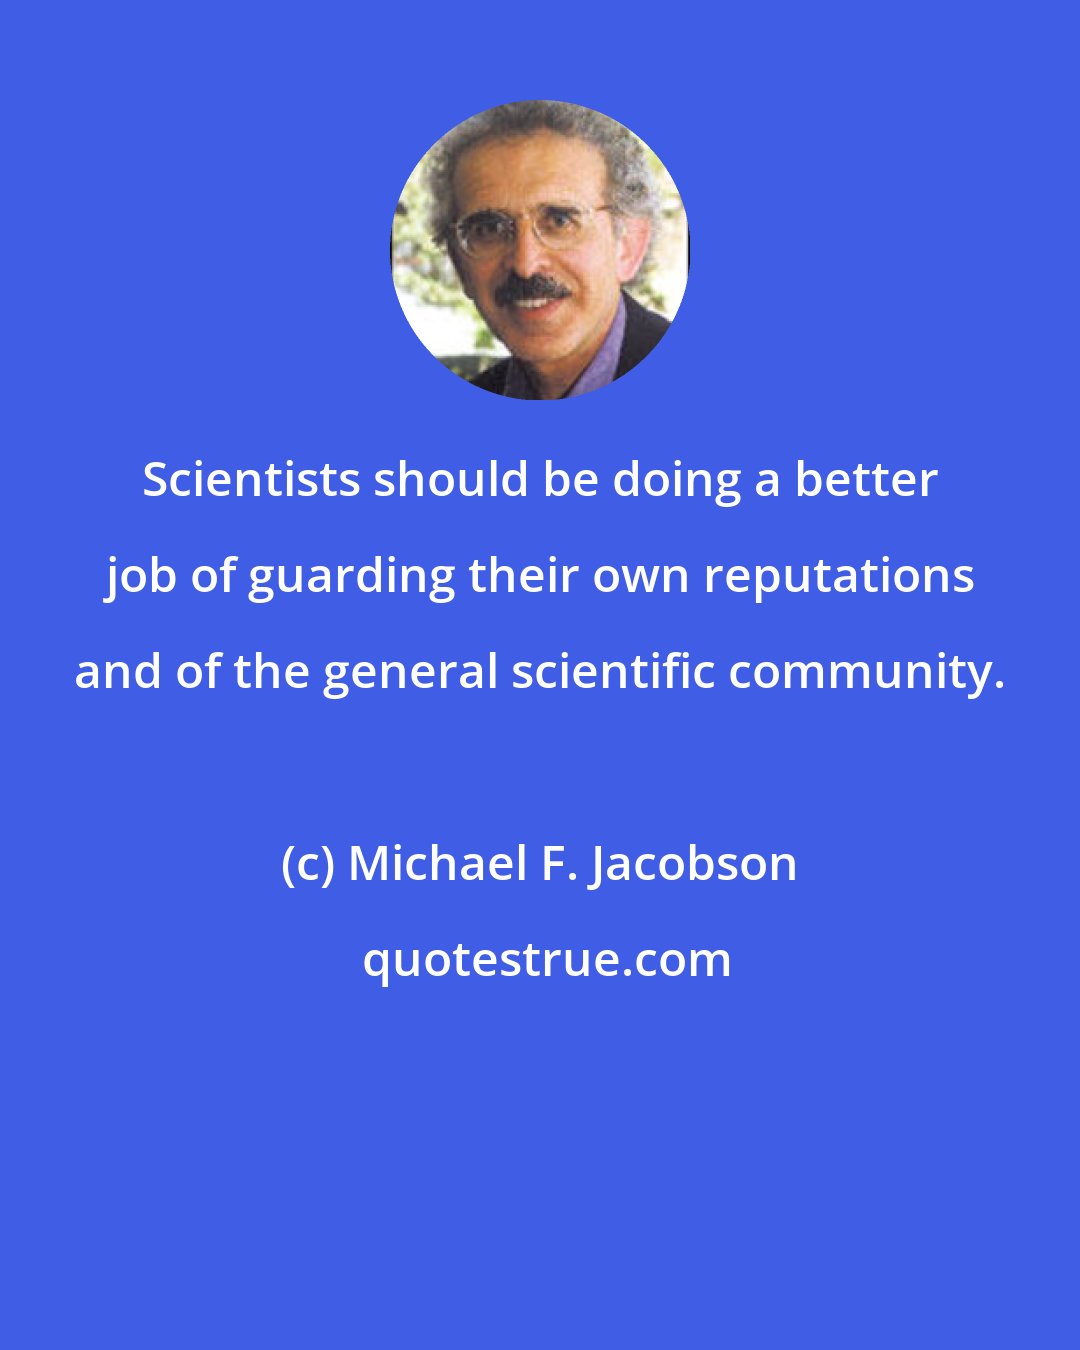 Michael F. Jacobson: Scientists should be doing a better job of guarding their own reputations and of the general scientific community.